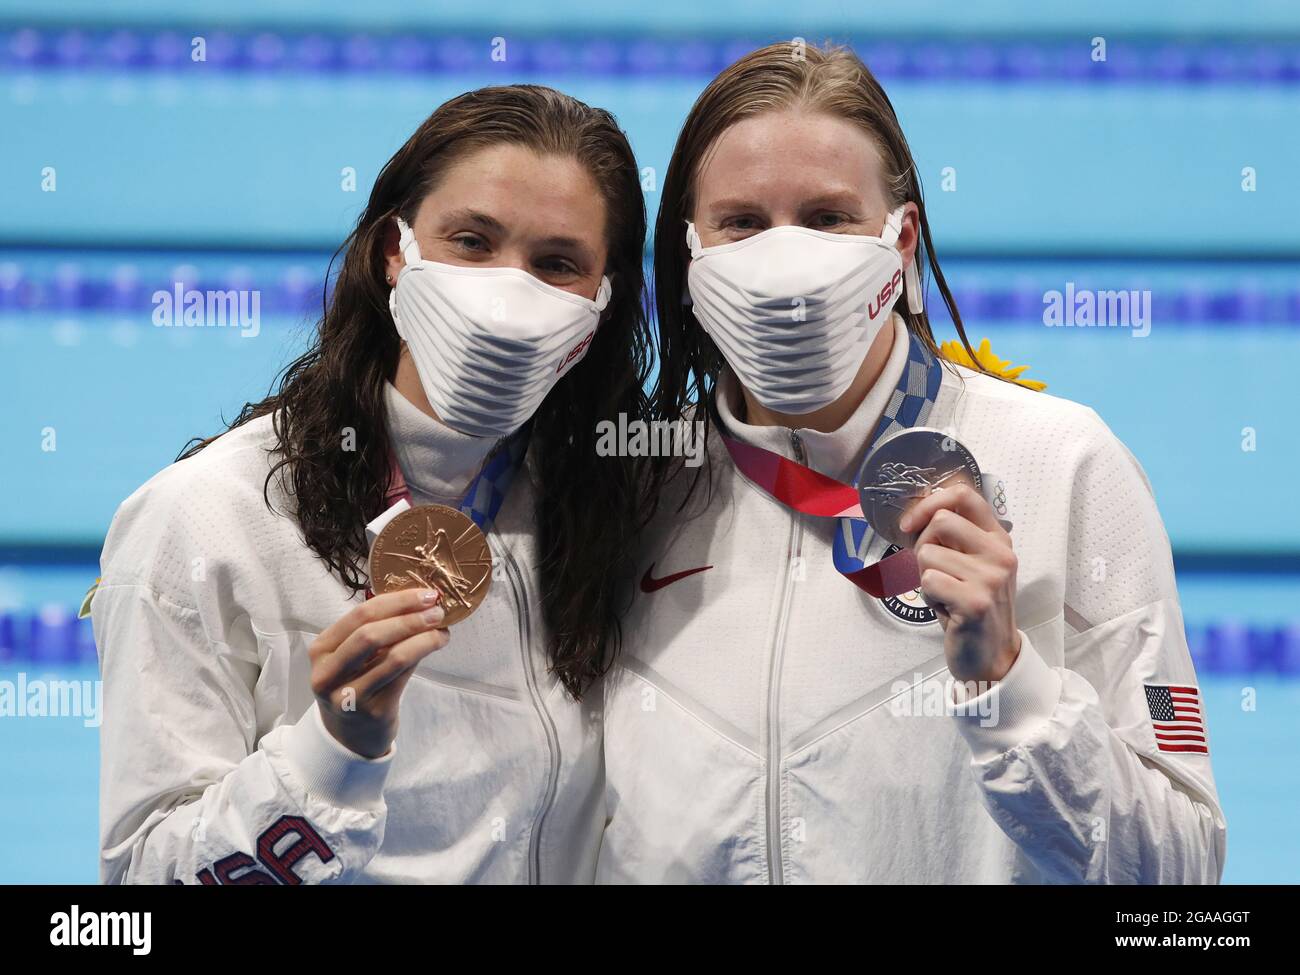 Tokyo, Japan. 29th July, 2021. USA's Bronze Medalist Annie Lazor (L) and Silver Medalist Lilly King pose for photographers following the Women's 200m Breaststroke Final at the Tokyo Aquatics Centre in Tokyo, Japan on Friday, July 30, 2021. South Africa's Tatiana Schoenmaker set a new world record of 2:18.95 winning the gold. Photo by Tasos Katopodis/UPI Credit: UPI/Alamy Live News Stock Photo